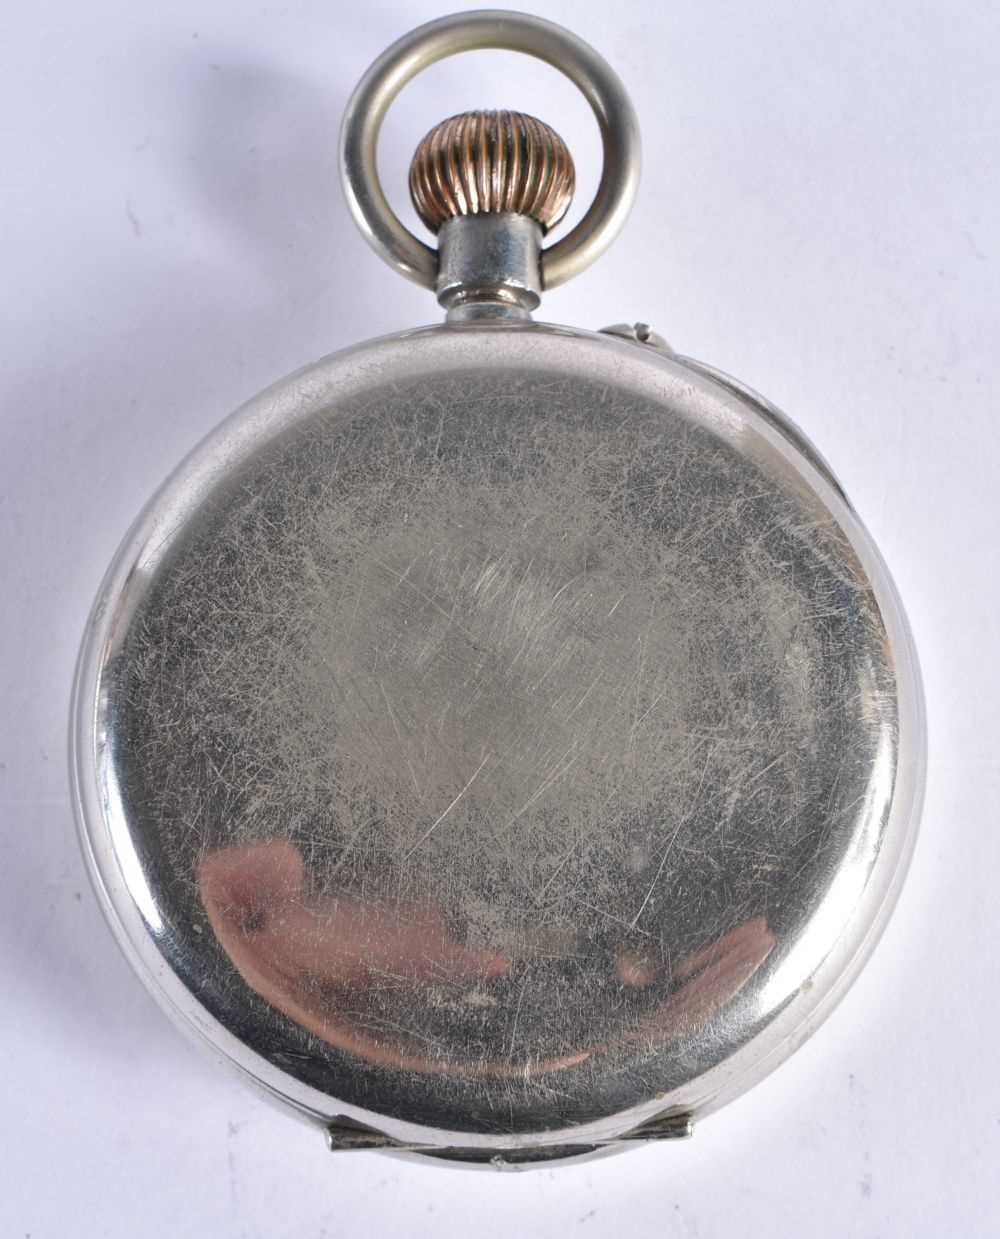 Gents Vintage Goliath Open Face Pocket Watch.  Movement - Hand-wind.  WORKING - Tested For Time. - Image 3 of 3